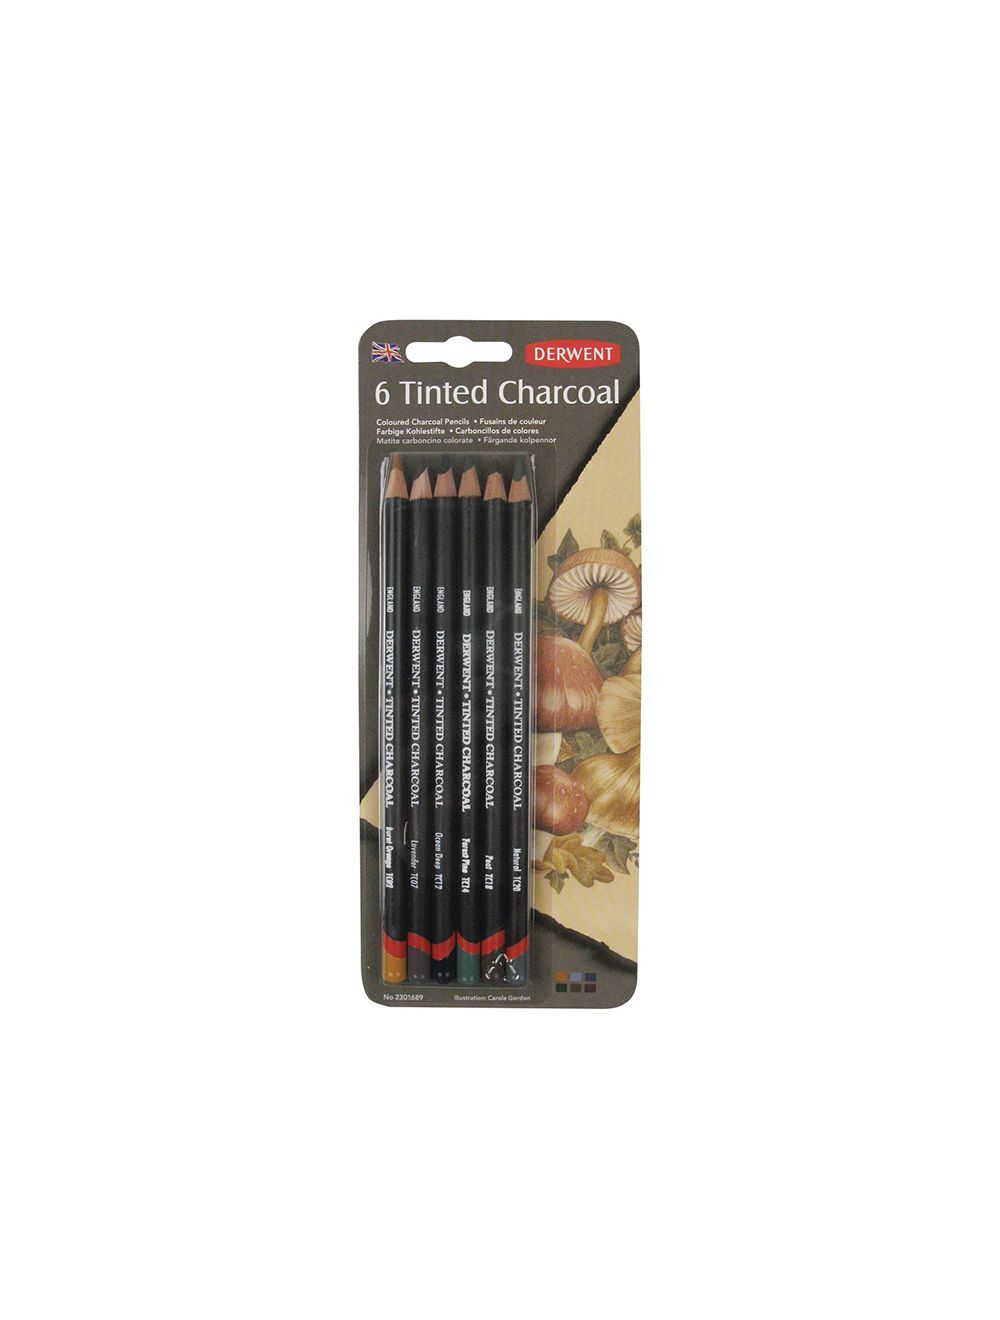 Derwent Tinted Charcoal 6 Pack